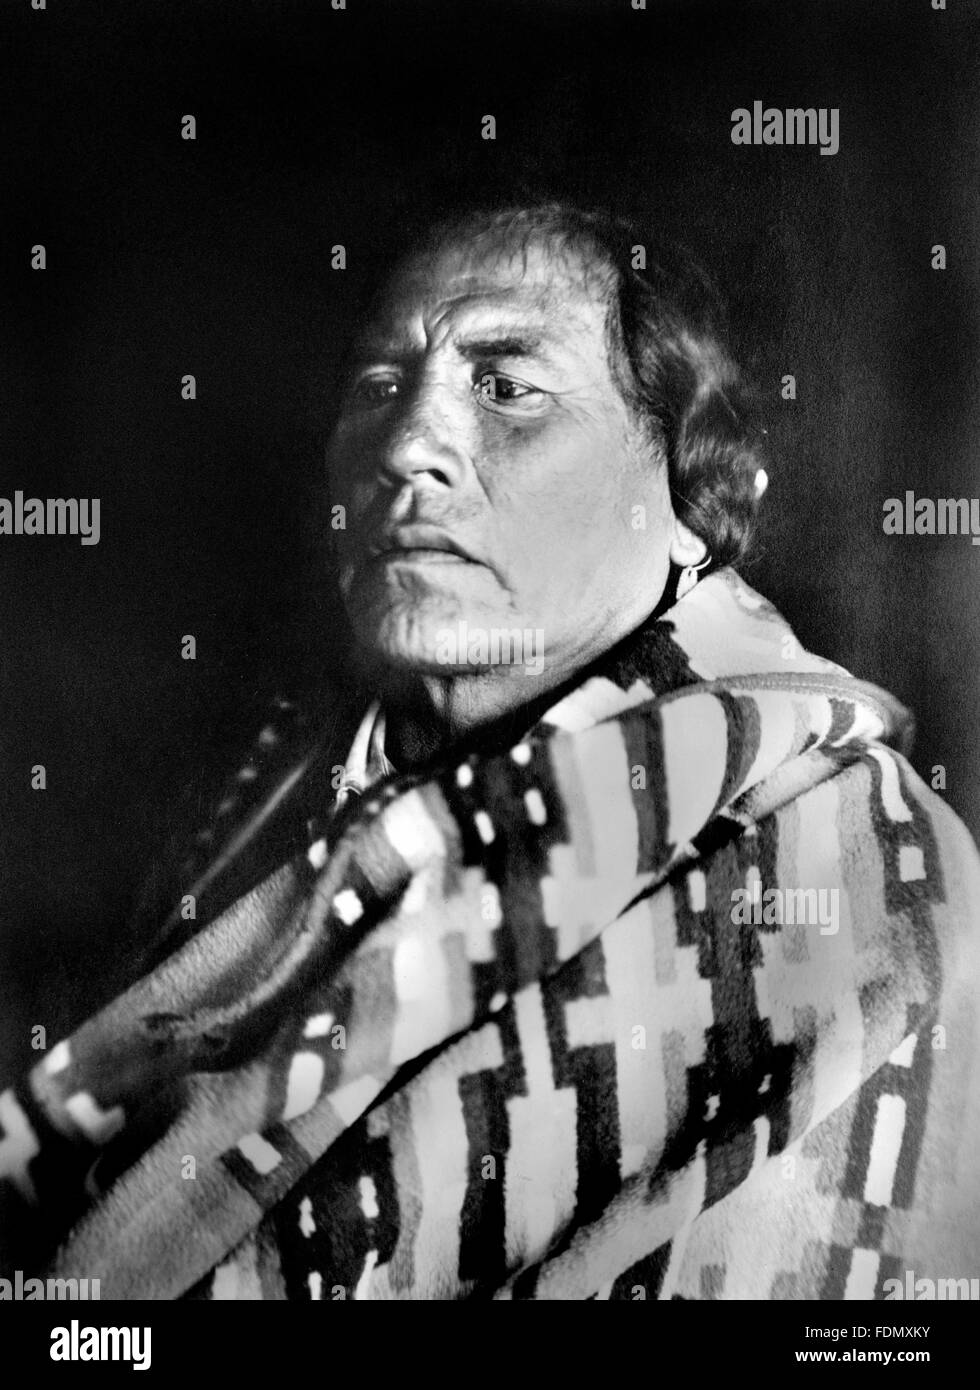 Ashishishe (c. 1856–1923), known as Curly (or Curley), a Crow scout in the US Army during the Sioux Wars, best known for having been one of the few survivors on the United States side at the Battle of Little Bighorn. Photo c.1907 by Richard Throssel. Stock Photo